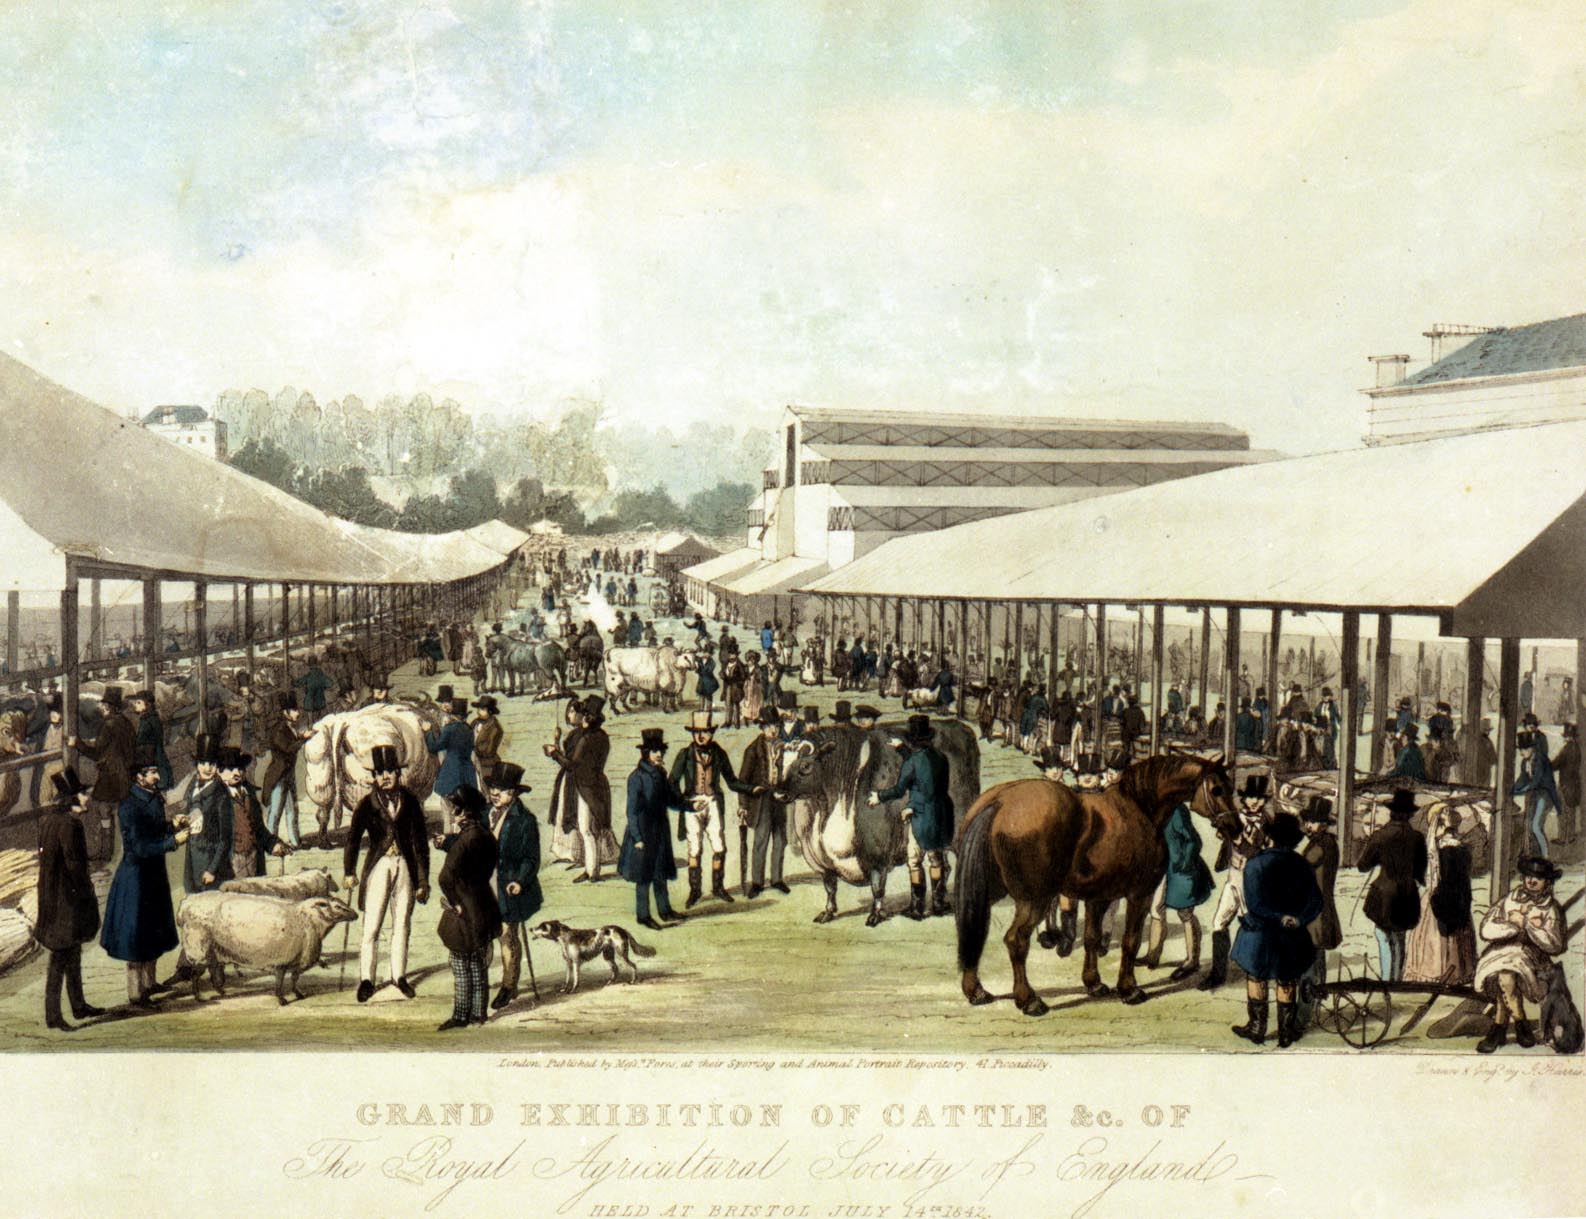 Coloured print showing two long stands or marquees sheltering cattle on show, and busy scene in the avenue between.